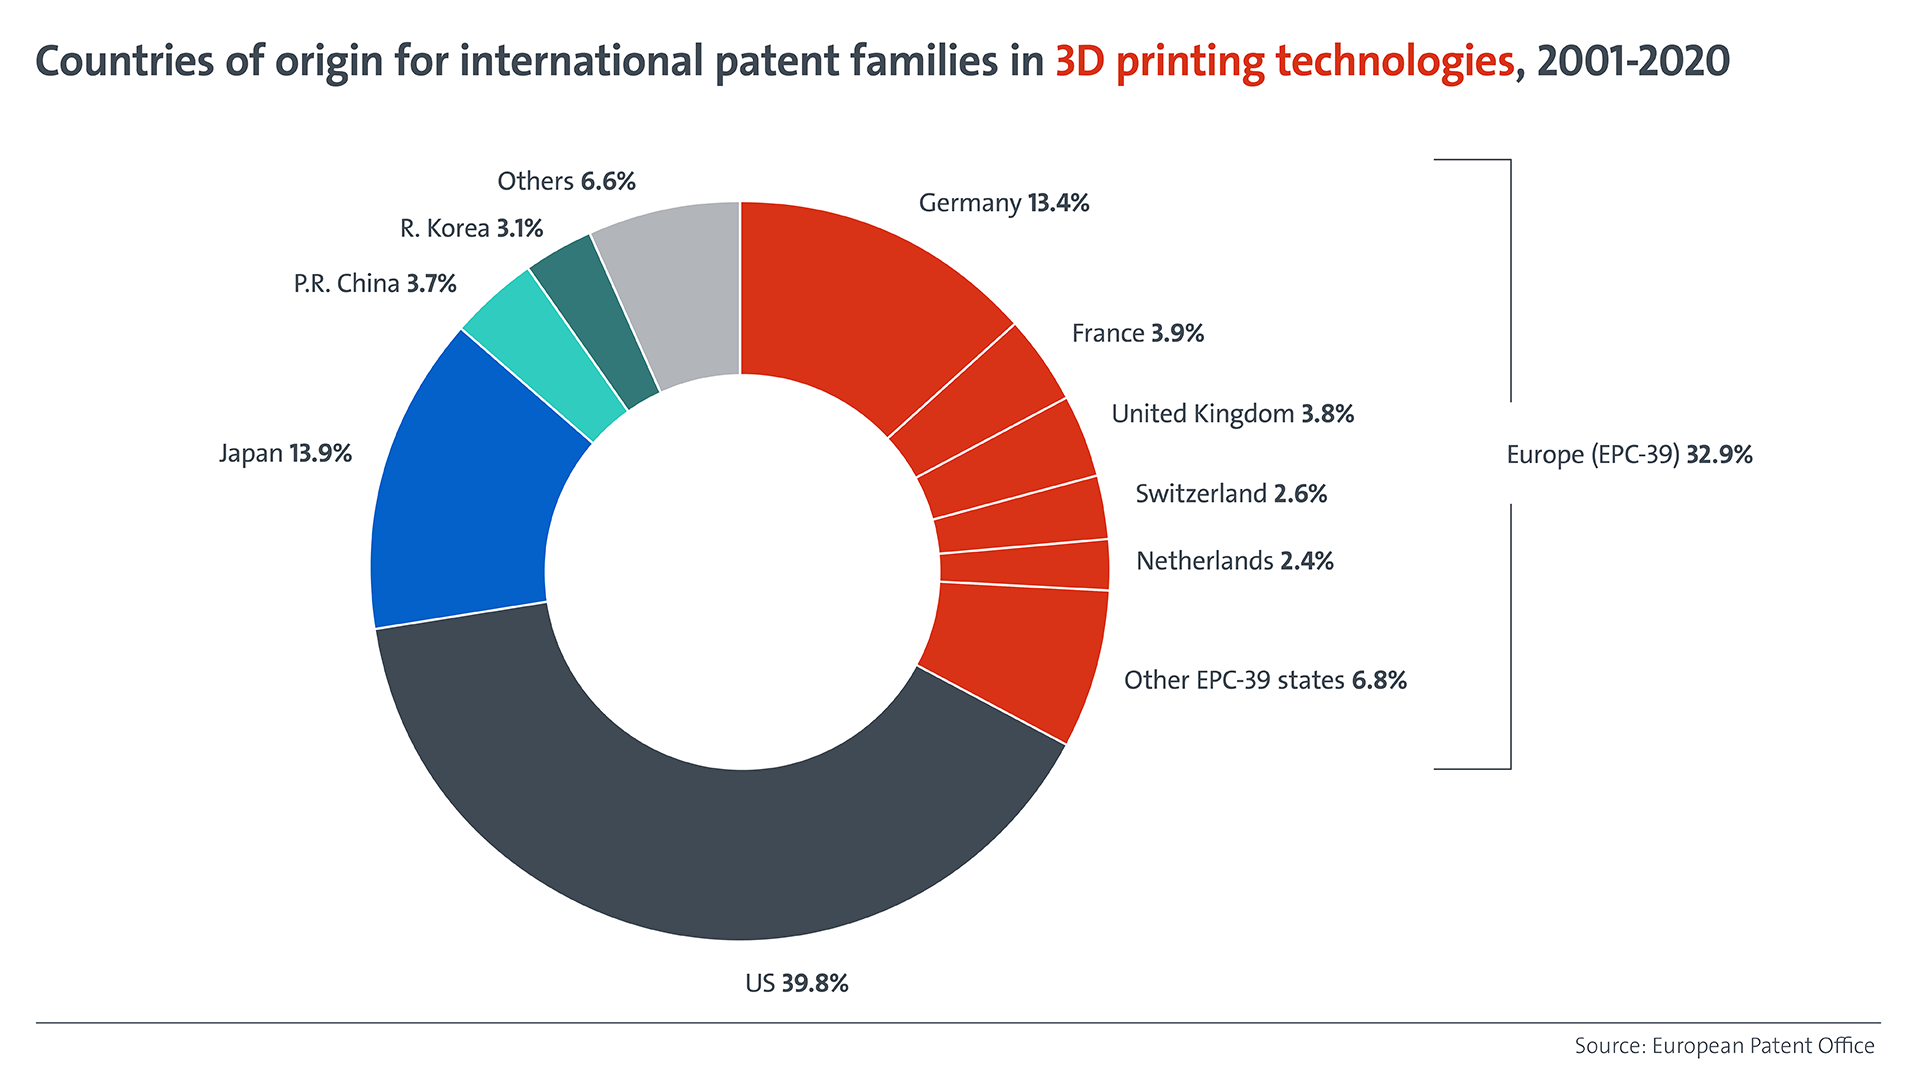 2.	Countries of origin of international patent families in 3D printing technologies